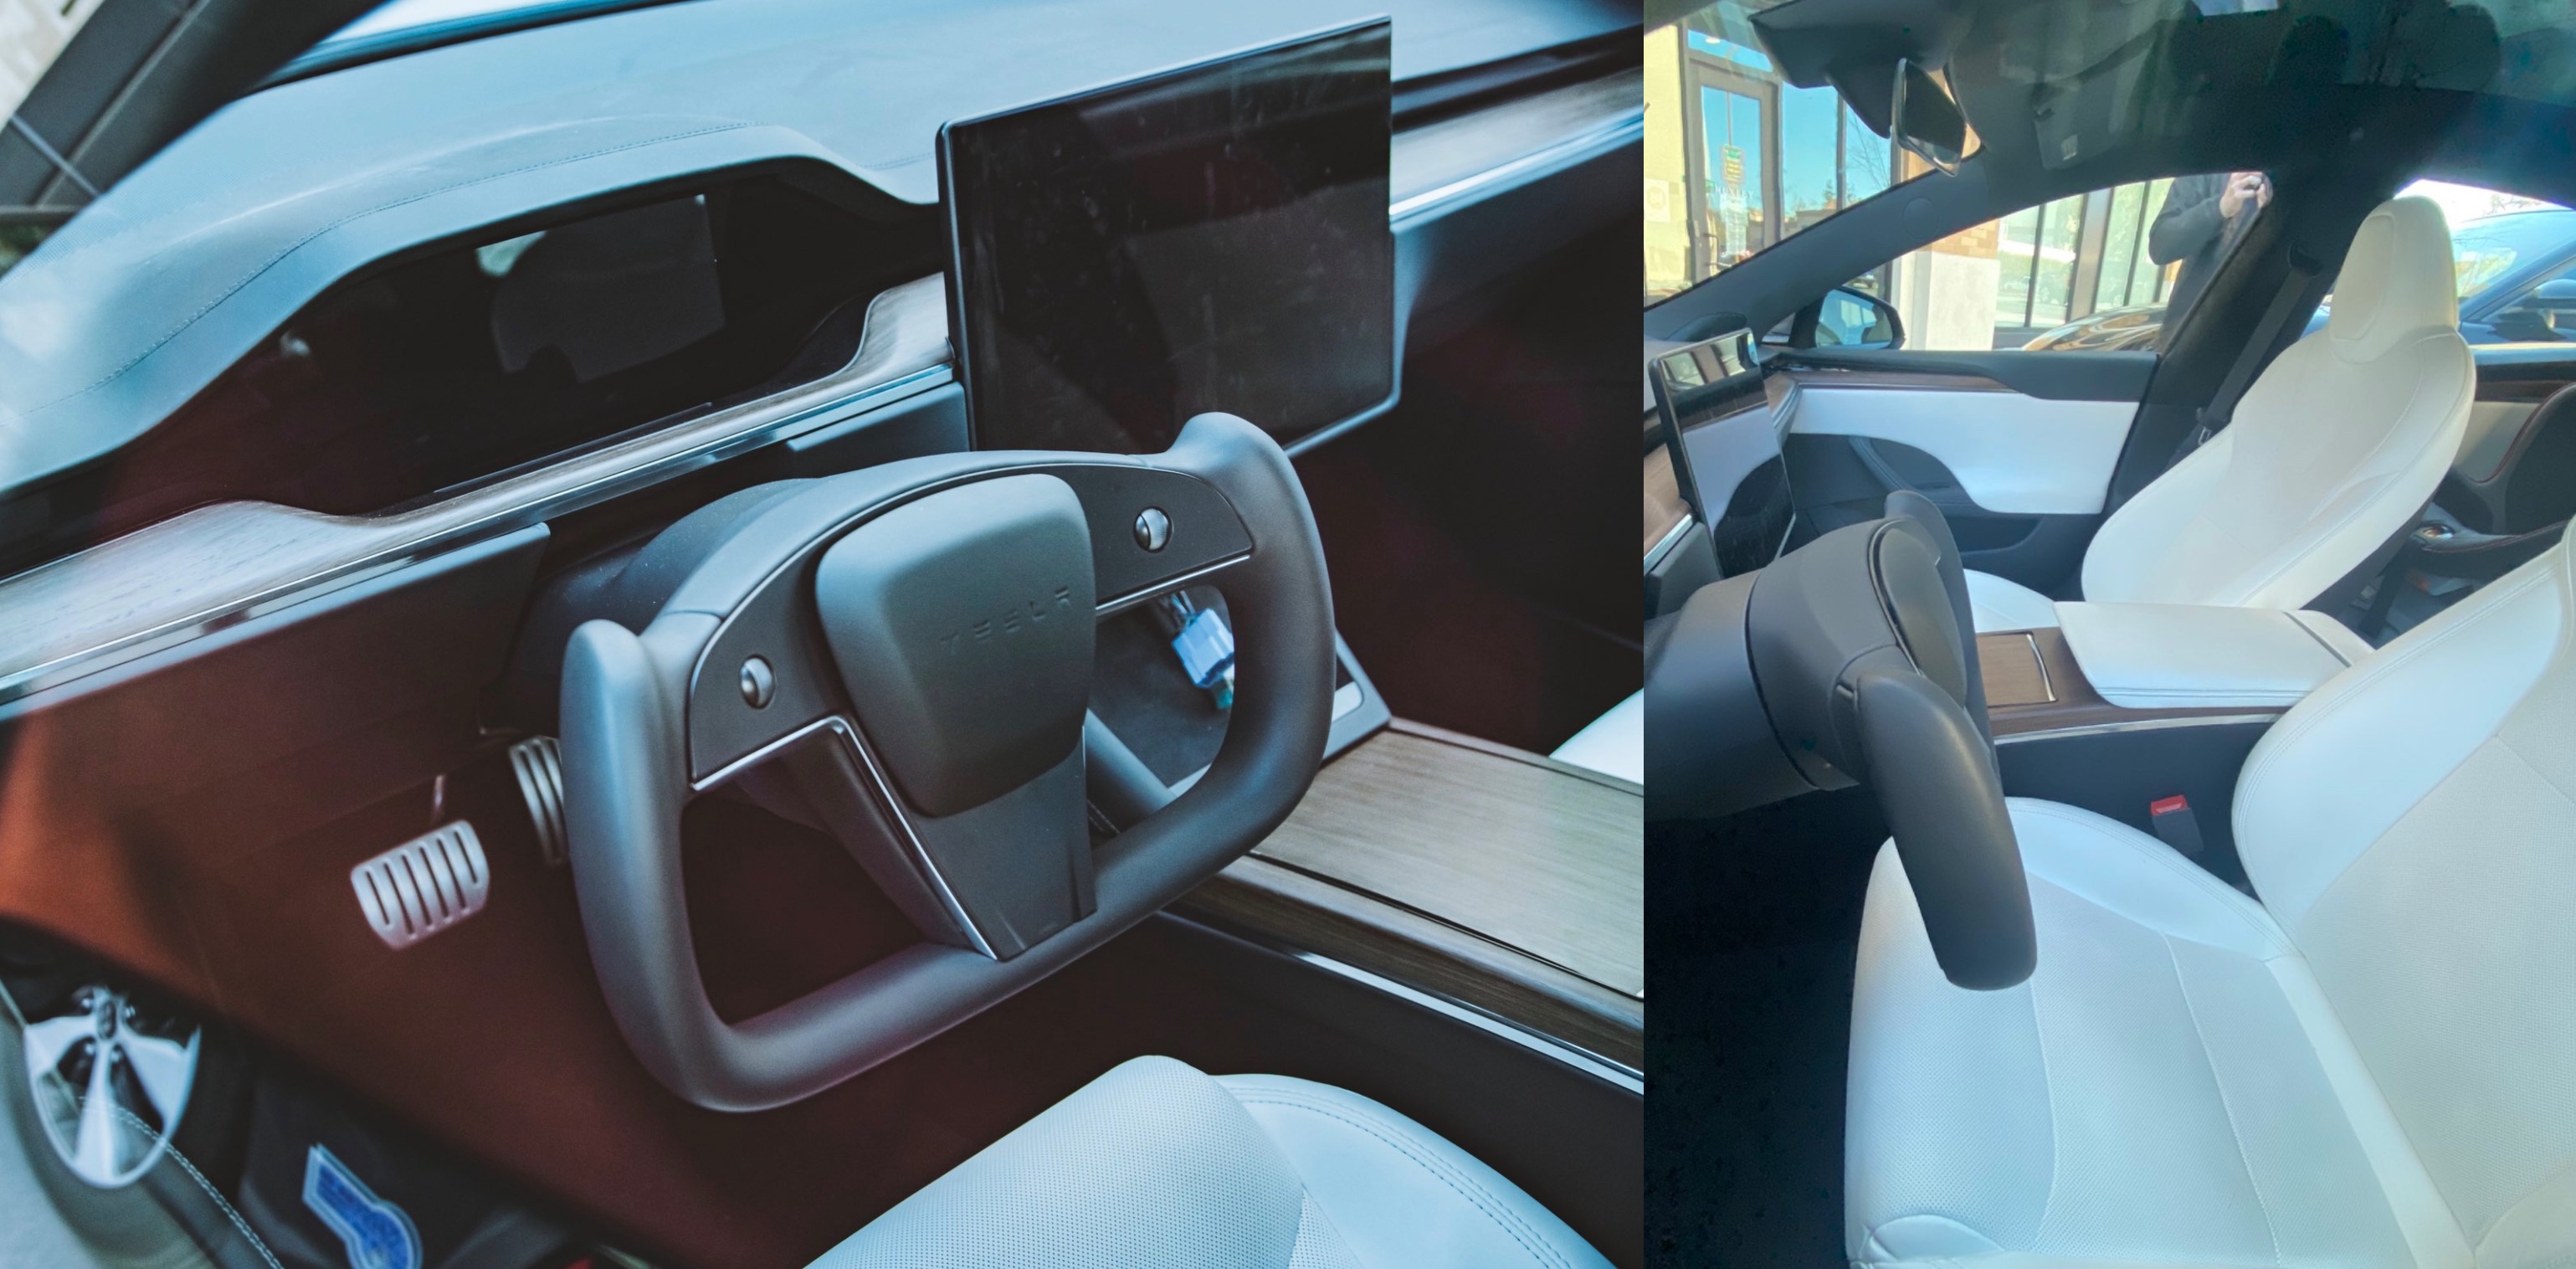 Tesla unveils new Model S with new interior, crazy steering wheel, and more